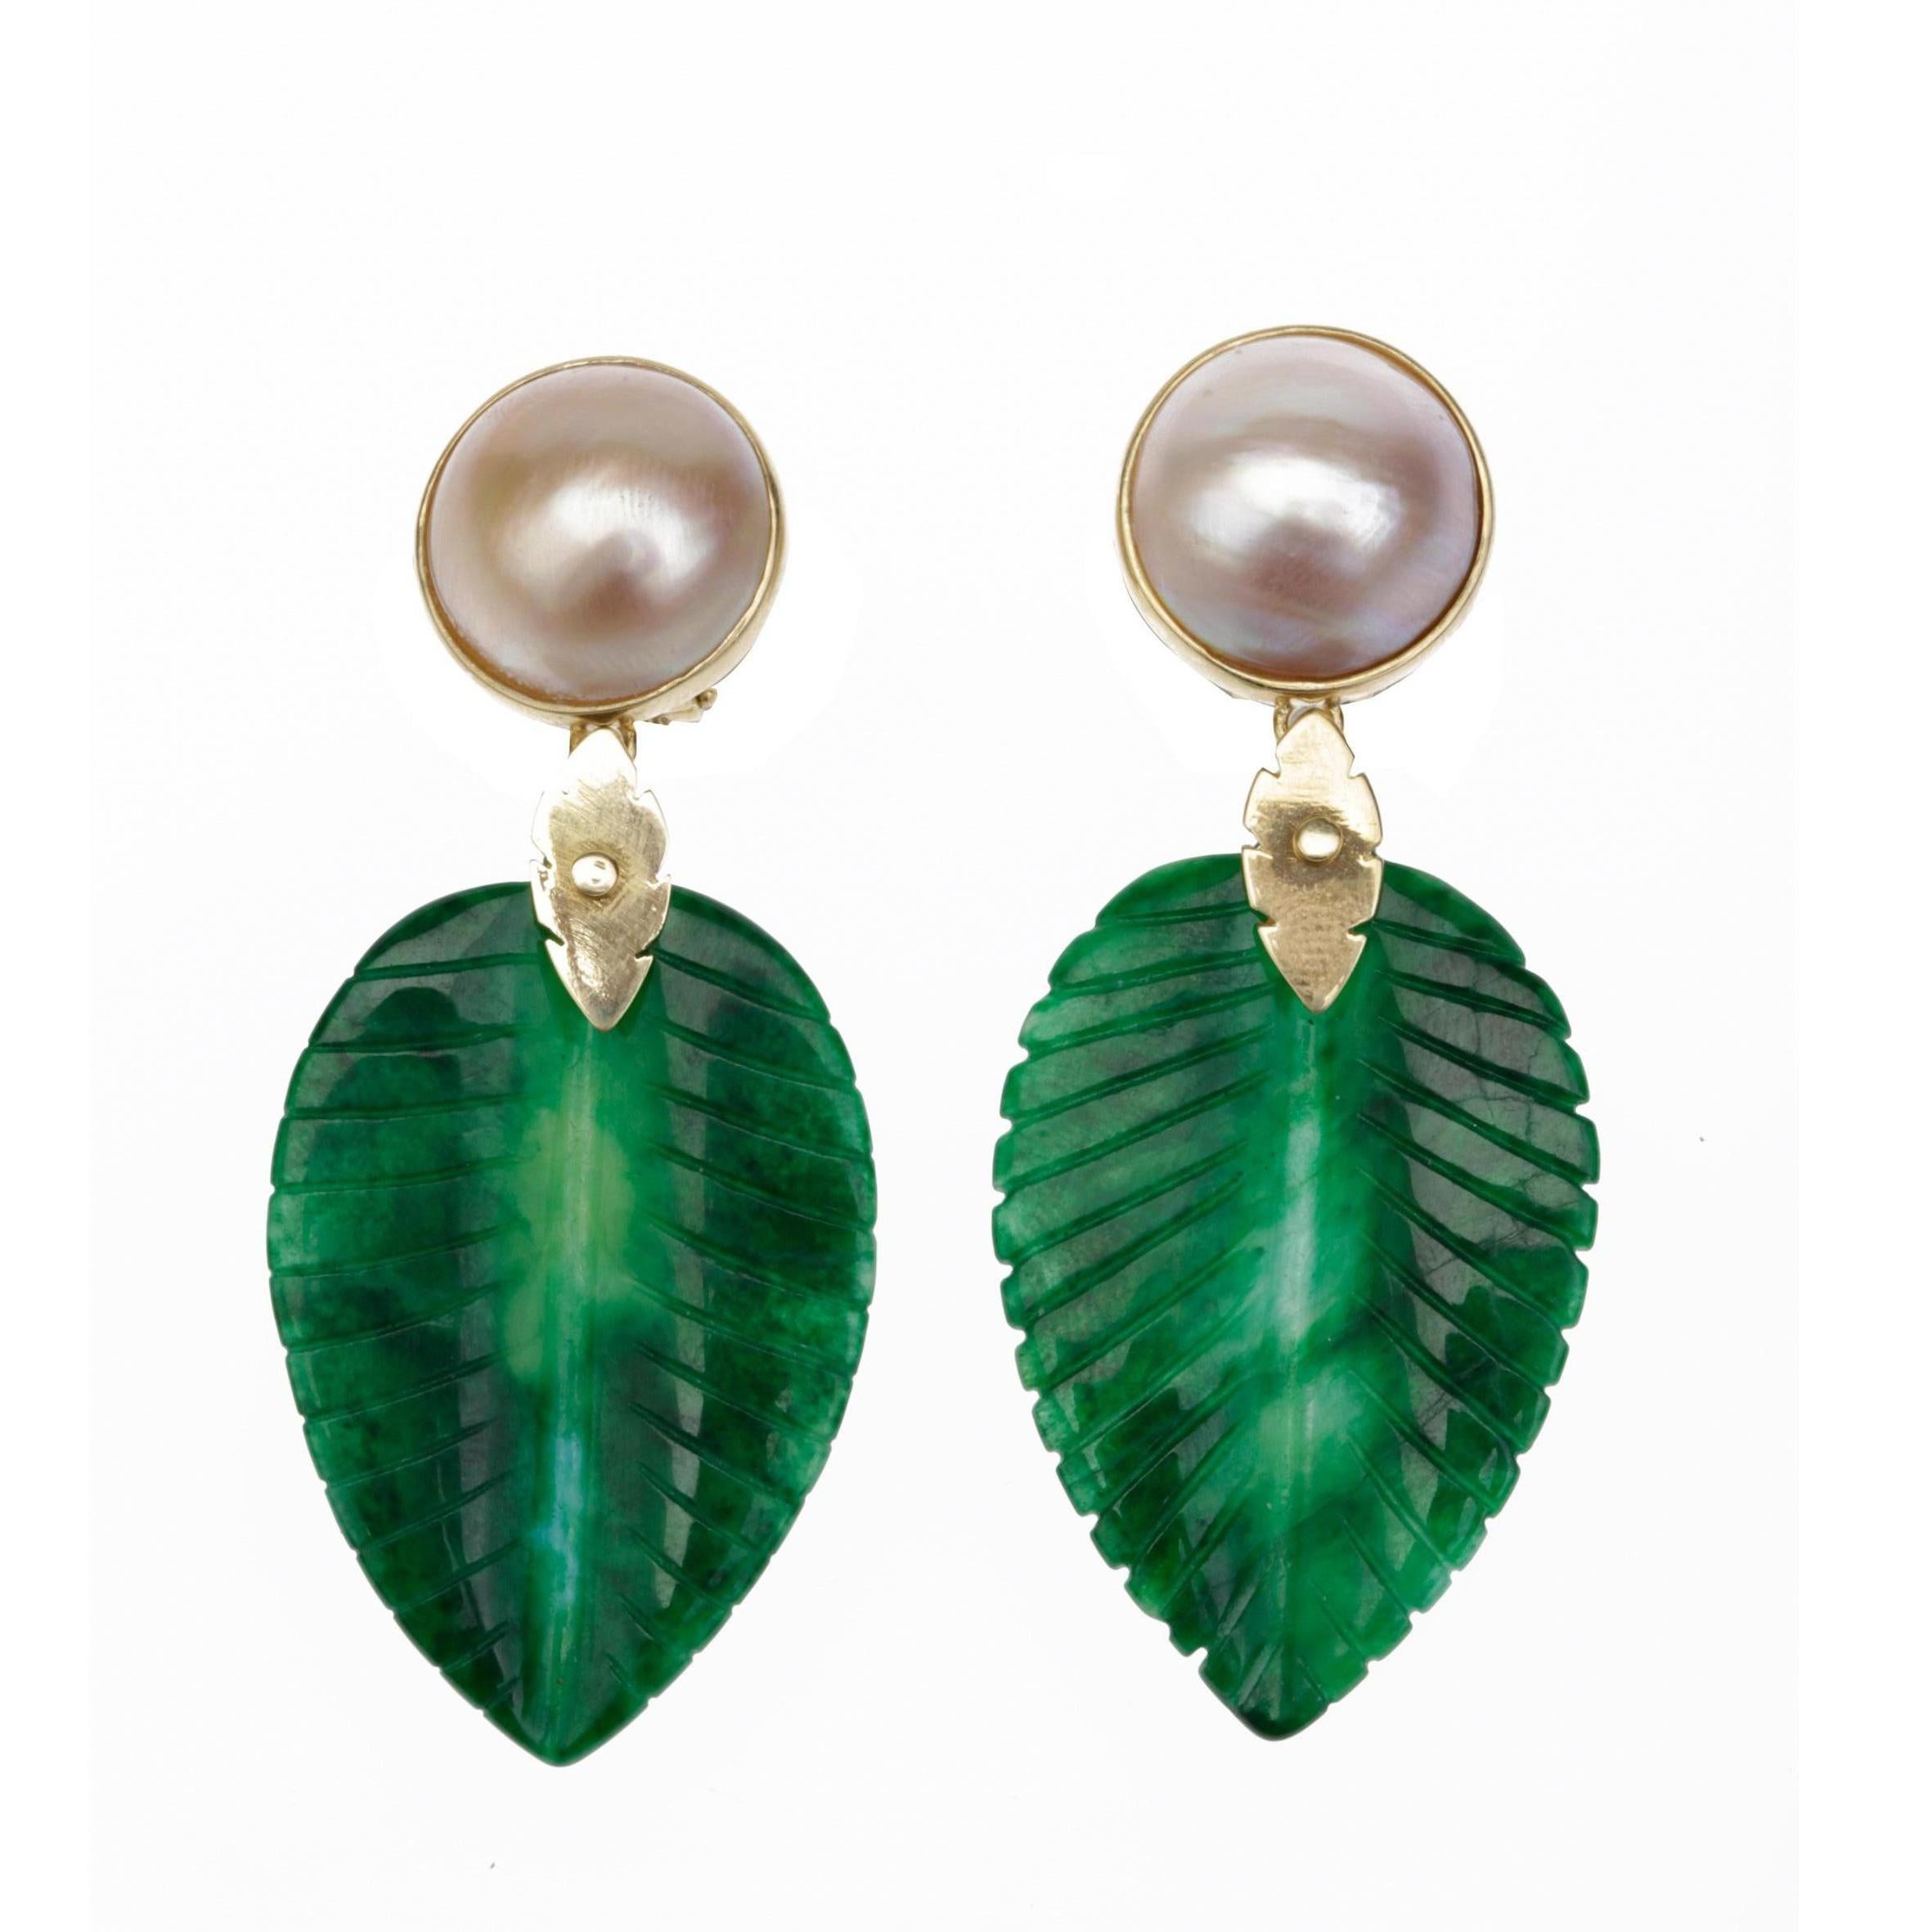 Amazing spinach  carved jade leaf, gold color mabè pearl, linked in 18 kt gold gr 8,70, total length 6cm.
The connection between the pearl and the leaf is a gold leaf, very nice details.
All Giulia Colussi jewelry is new and has never been